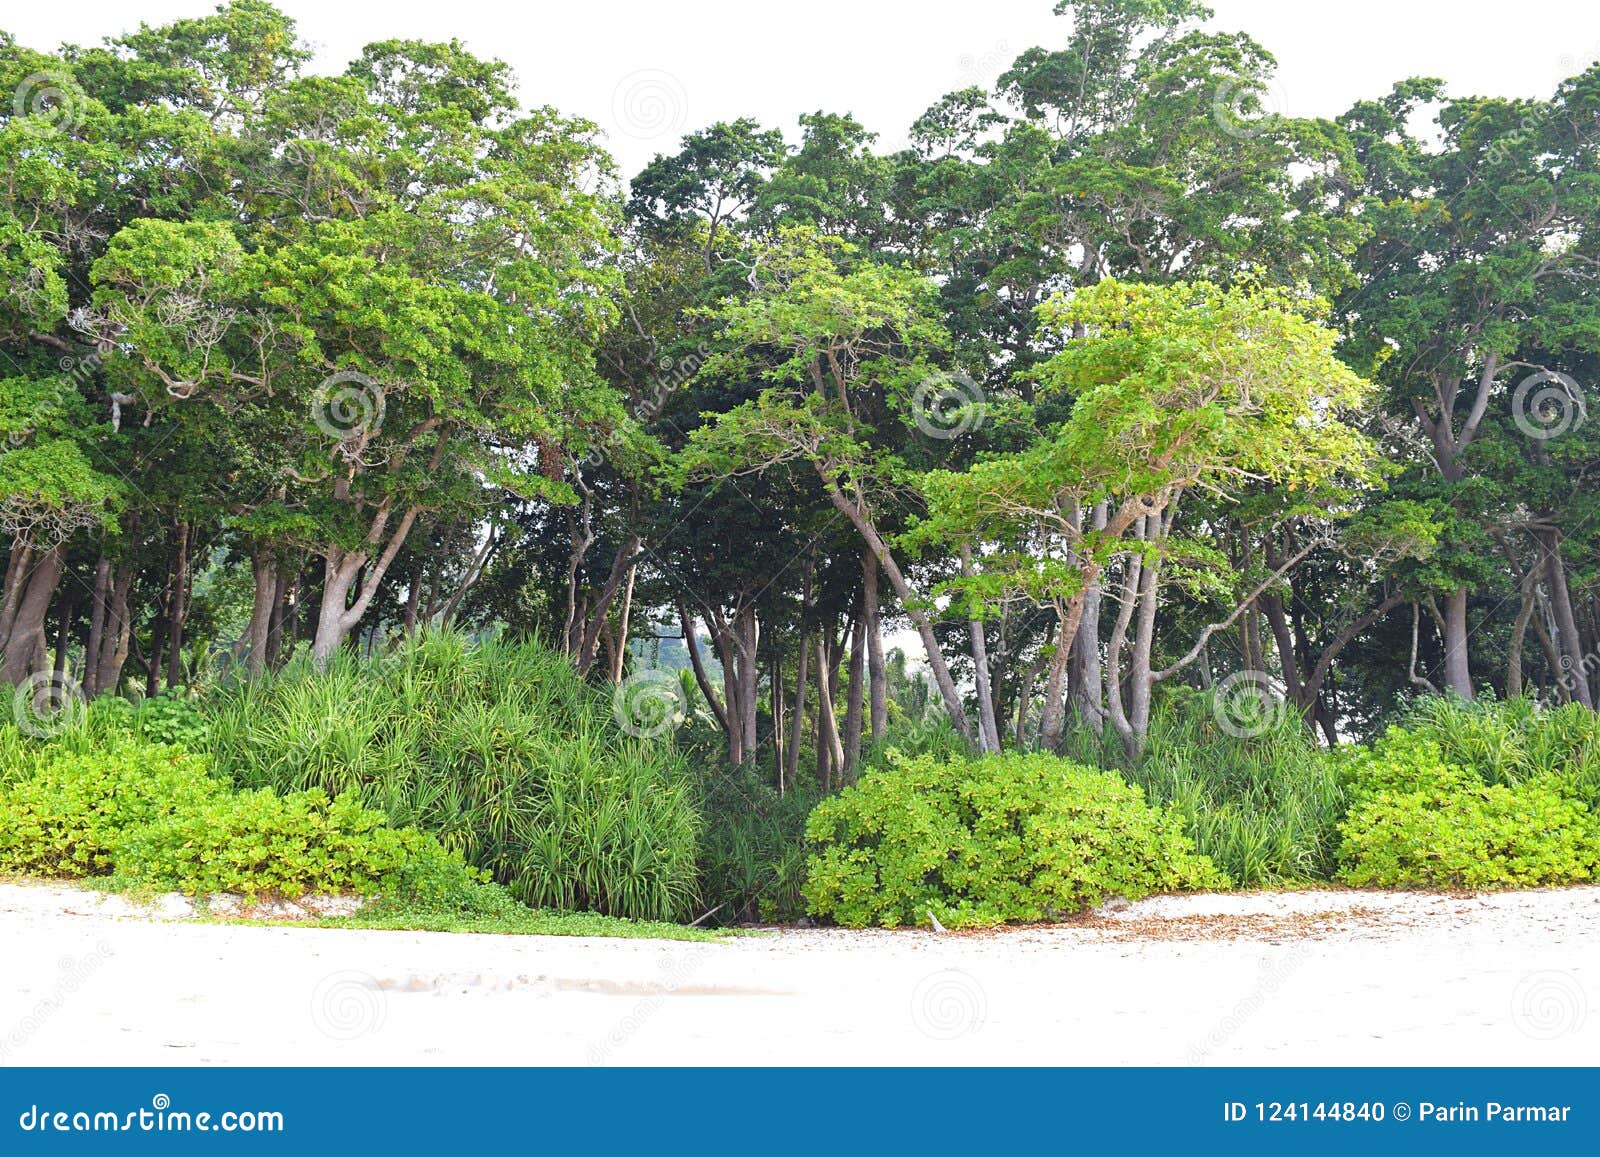 greenery all around - trees, shrubs, and grass - green earth - tropical littoral forest